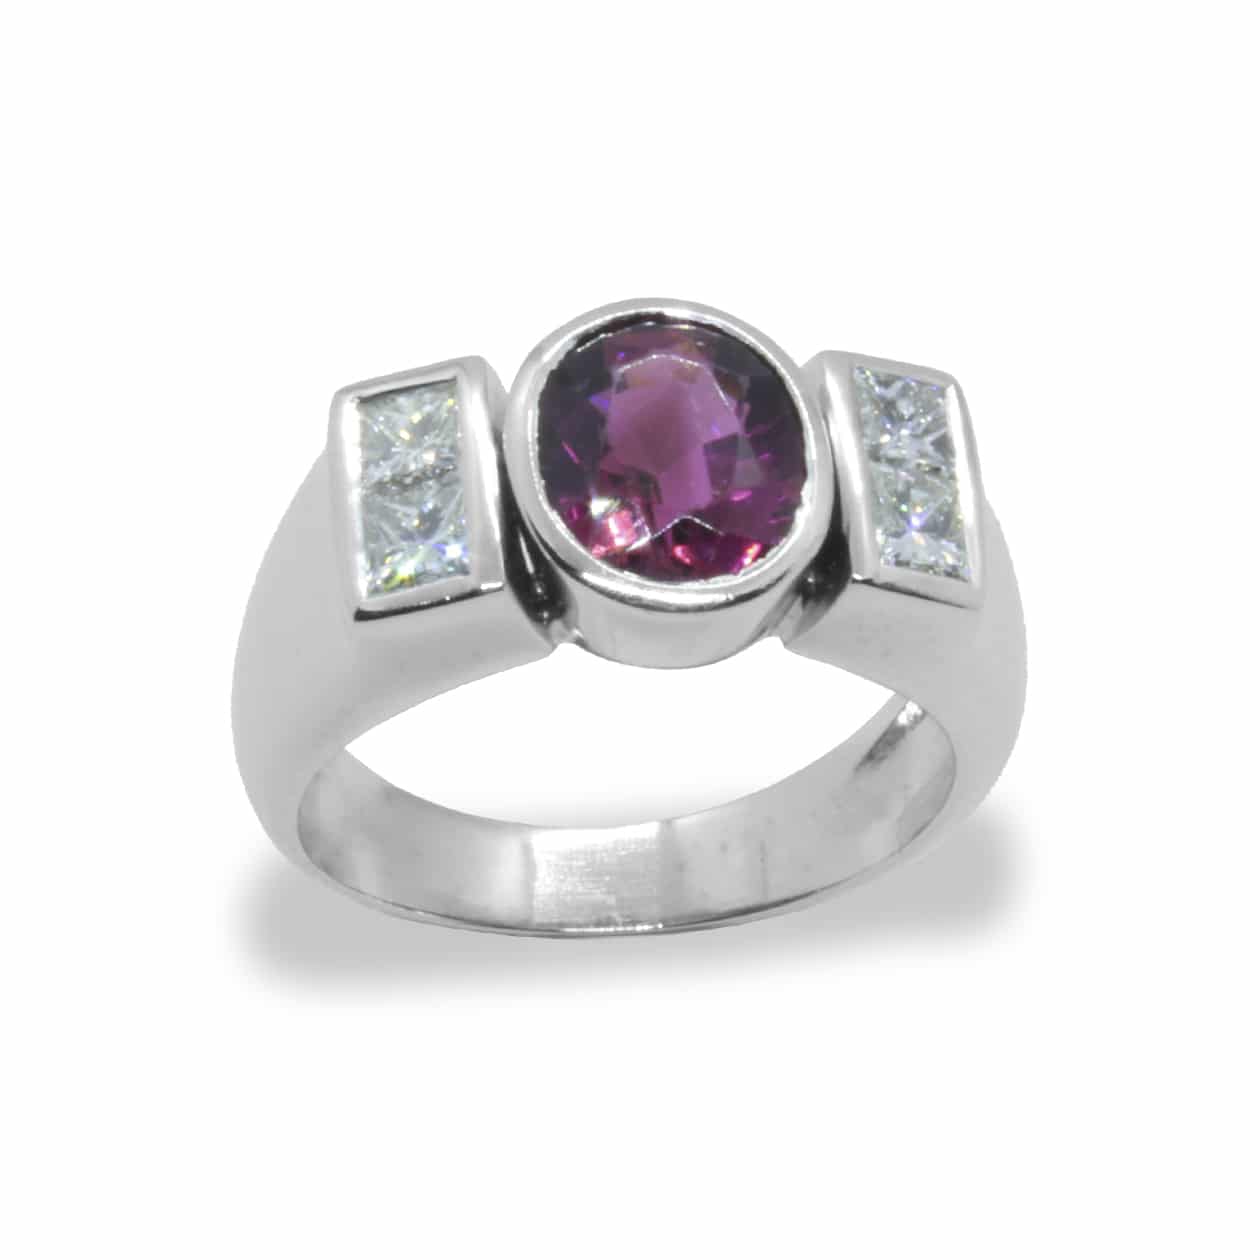 Ring with rubellite tourmaline and diamonds in 18K white gold; handmade.  Exclusive piece.